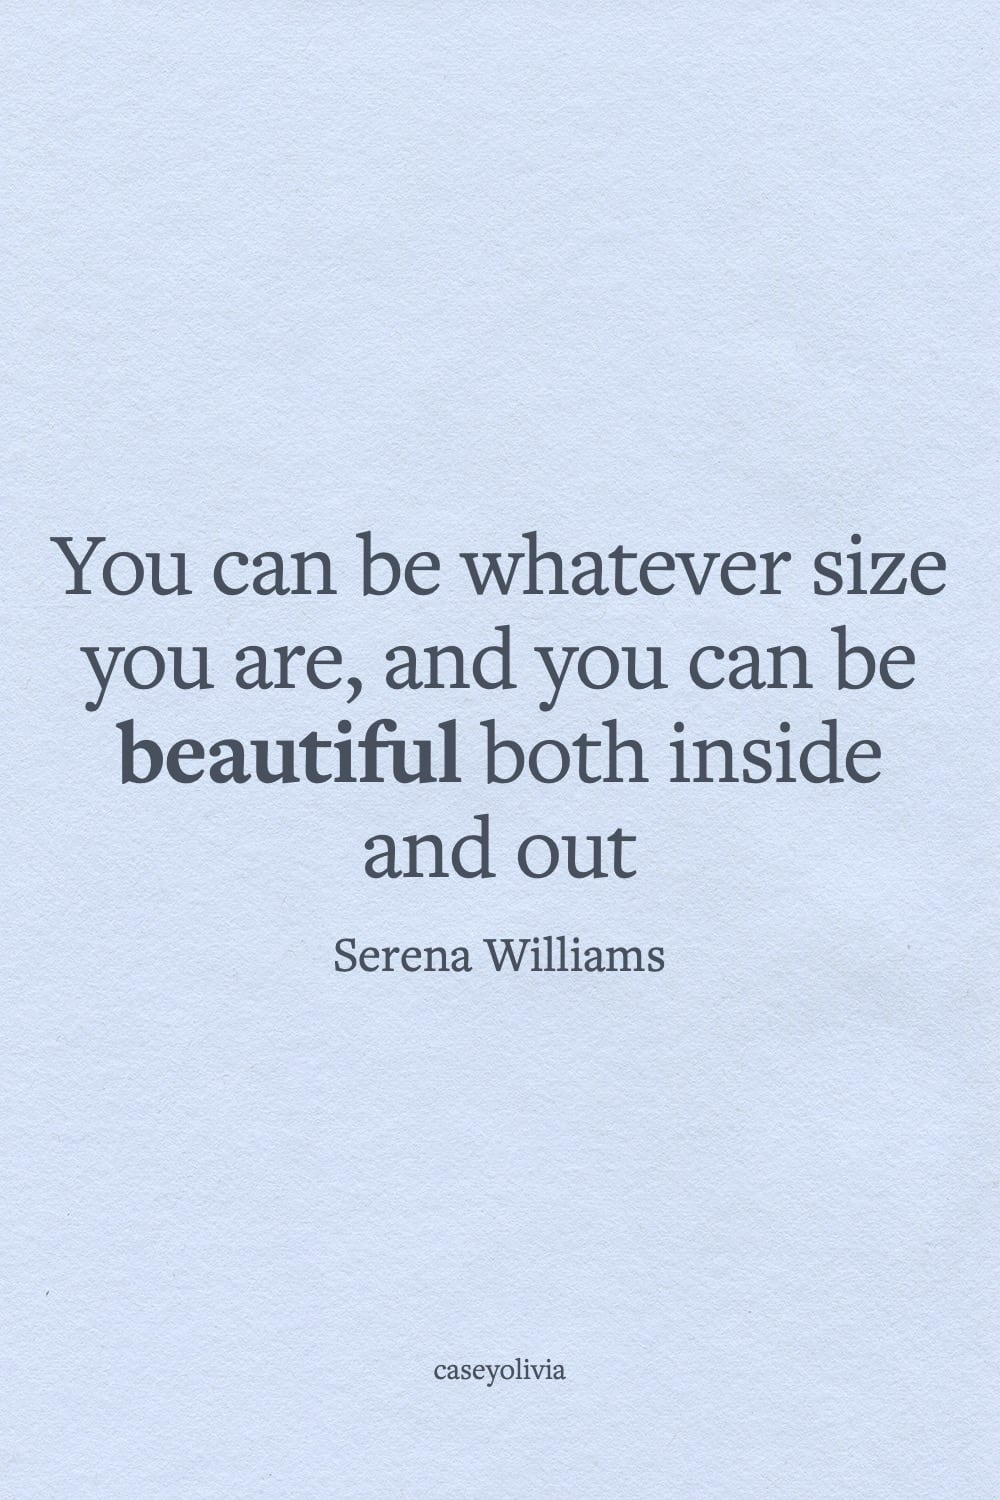 serena williams happiness quote about loving yourself